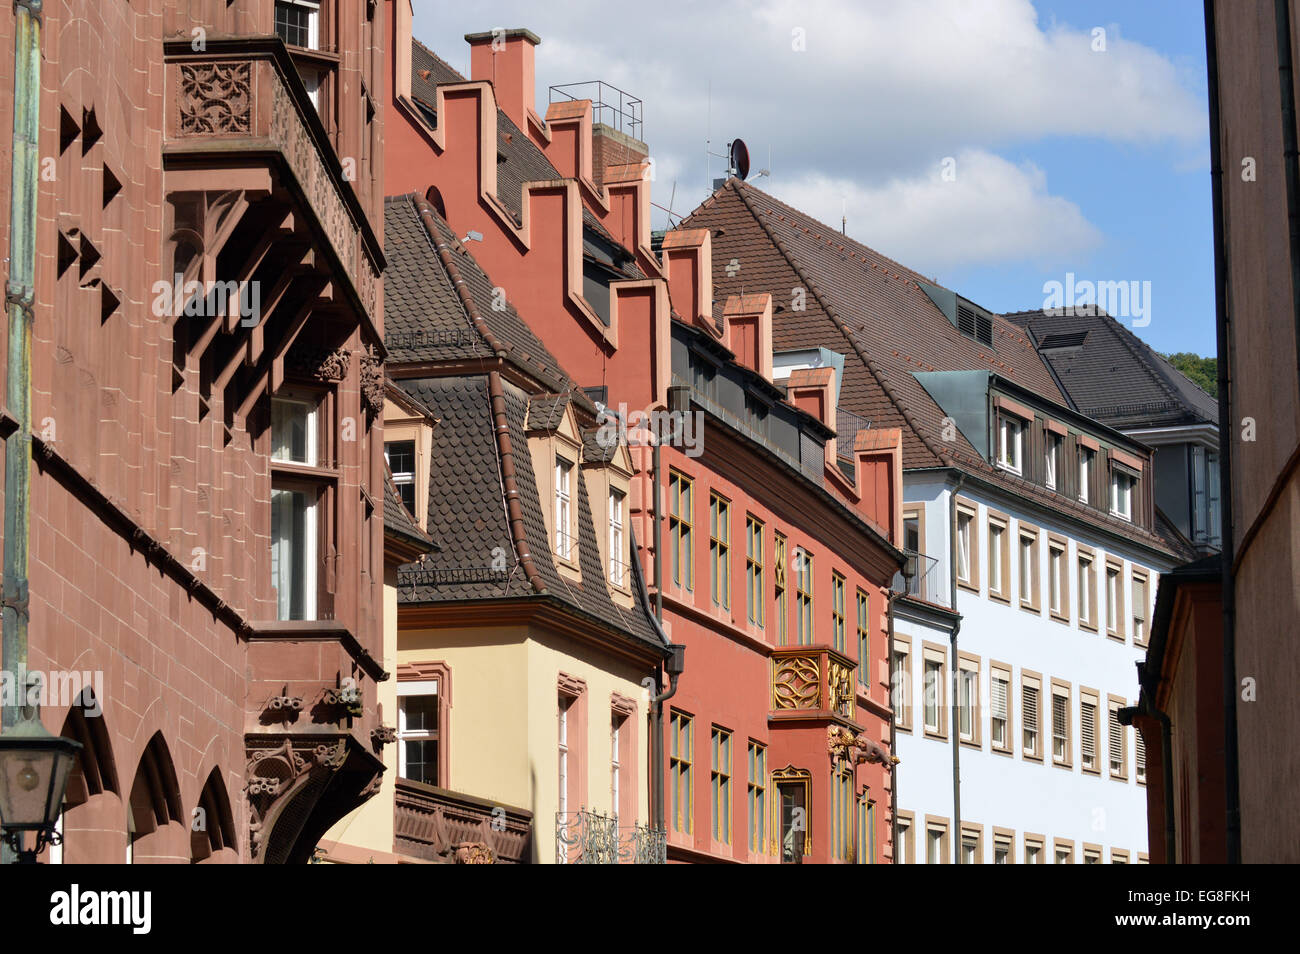 Various Facades of old inner-city buildings in Freiburg, Germany Stock Photo